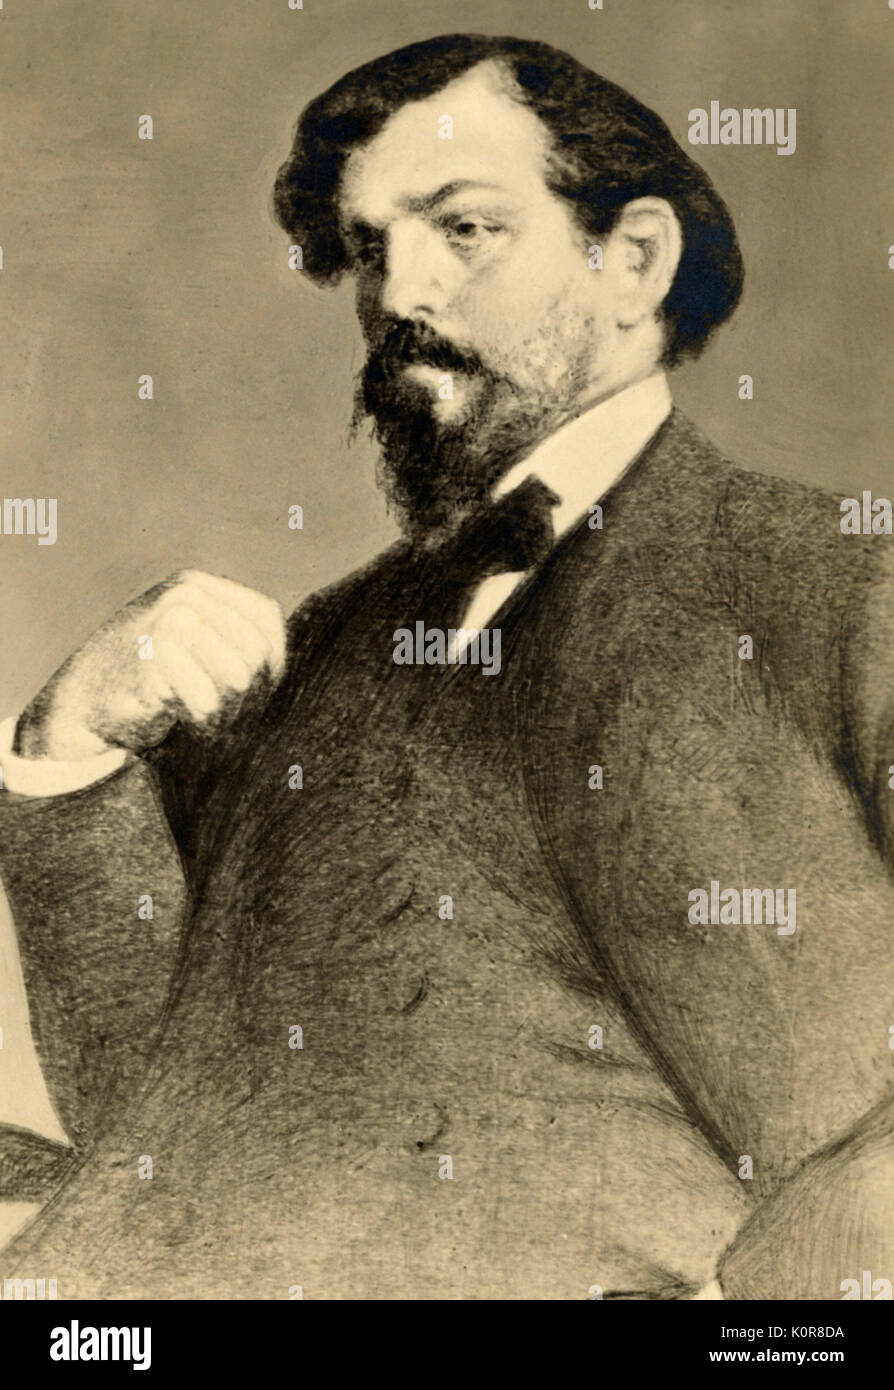 DEBUSSY, Claude - Portrait. French composer 22 August 1862 - 25 March ...